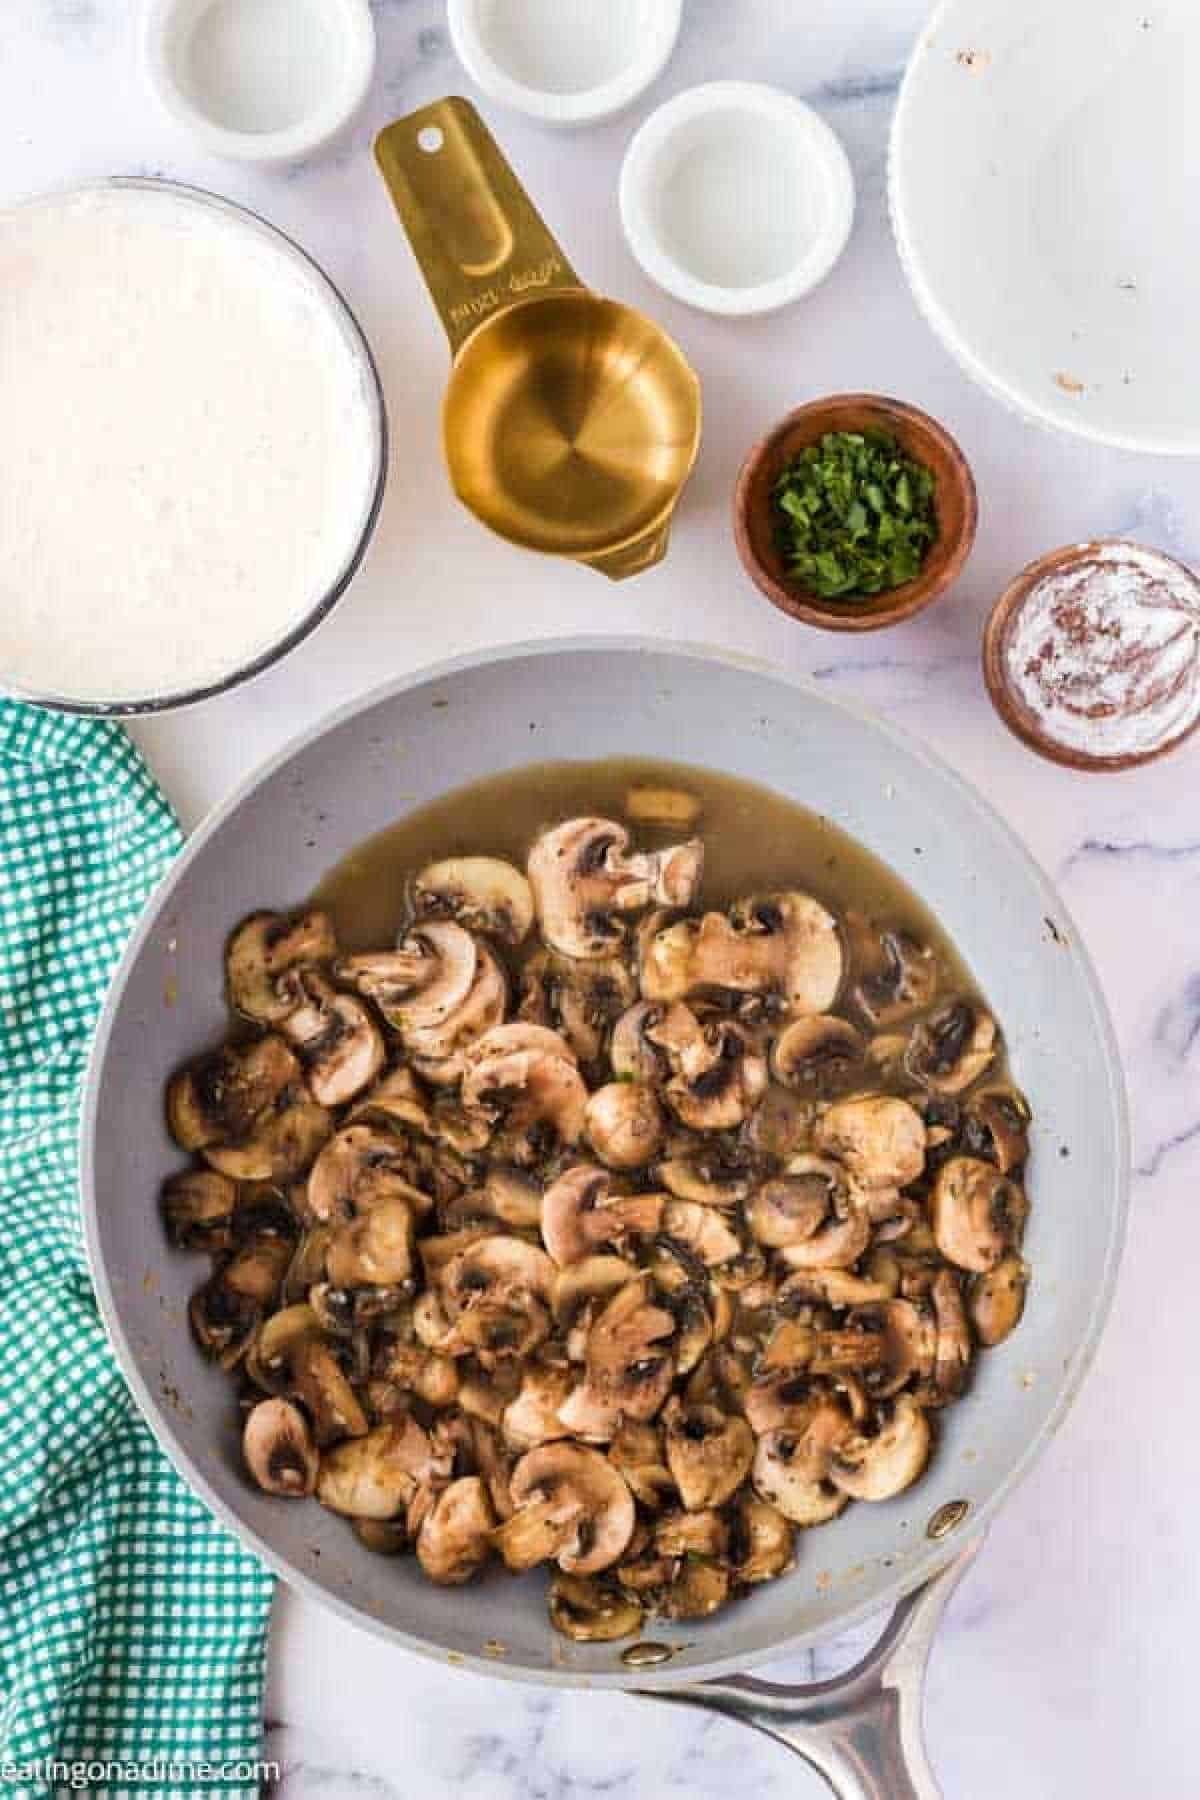 Cooked slice mushrooms in sauce with small bowls of seasoning and heavy whipping cream mixture